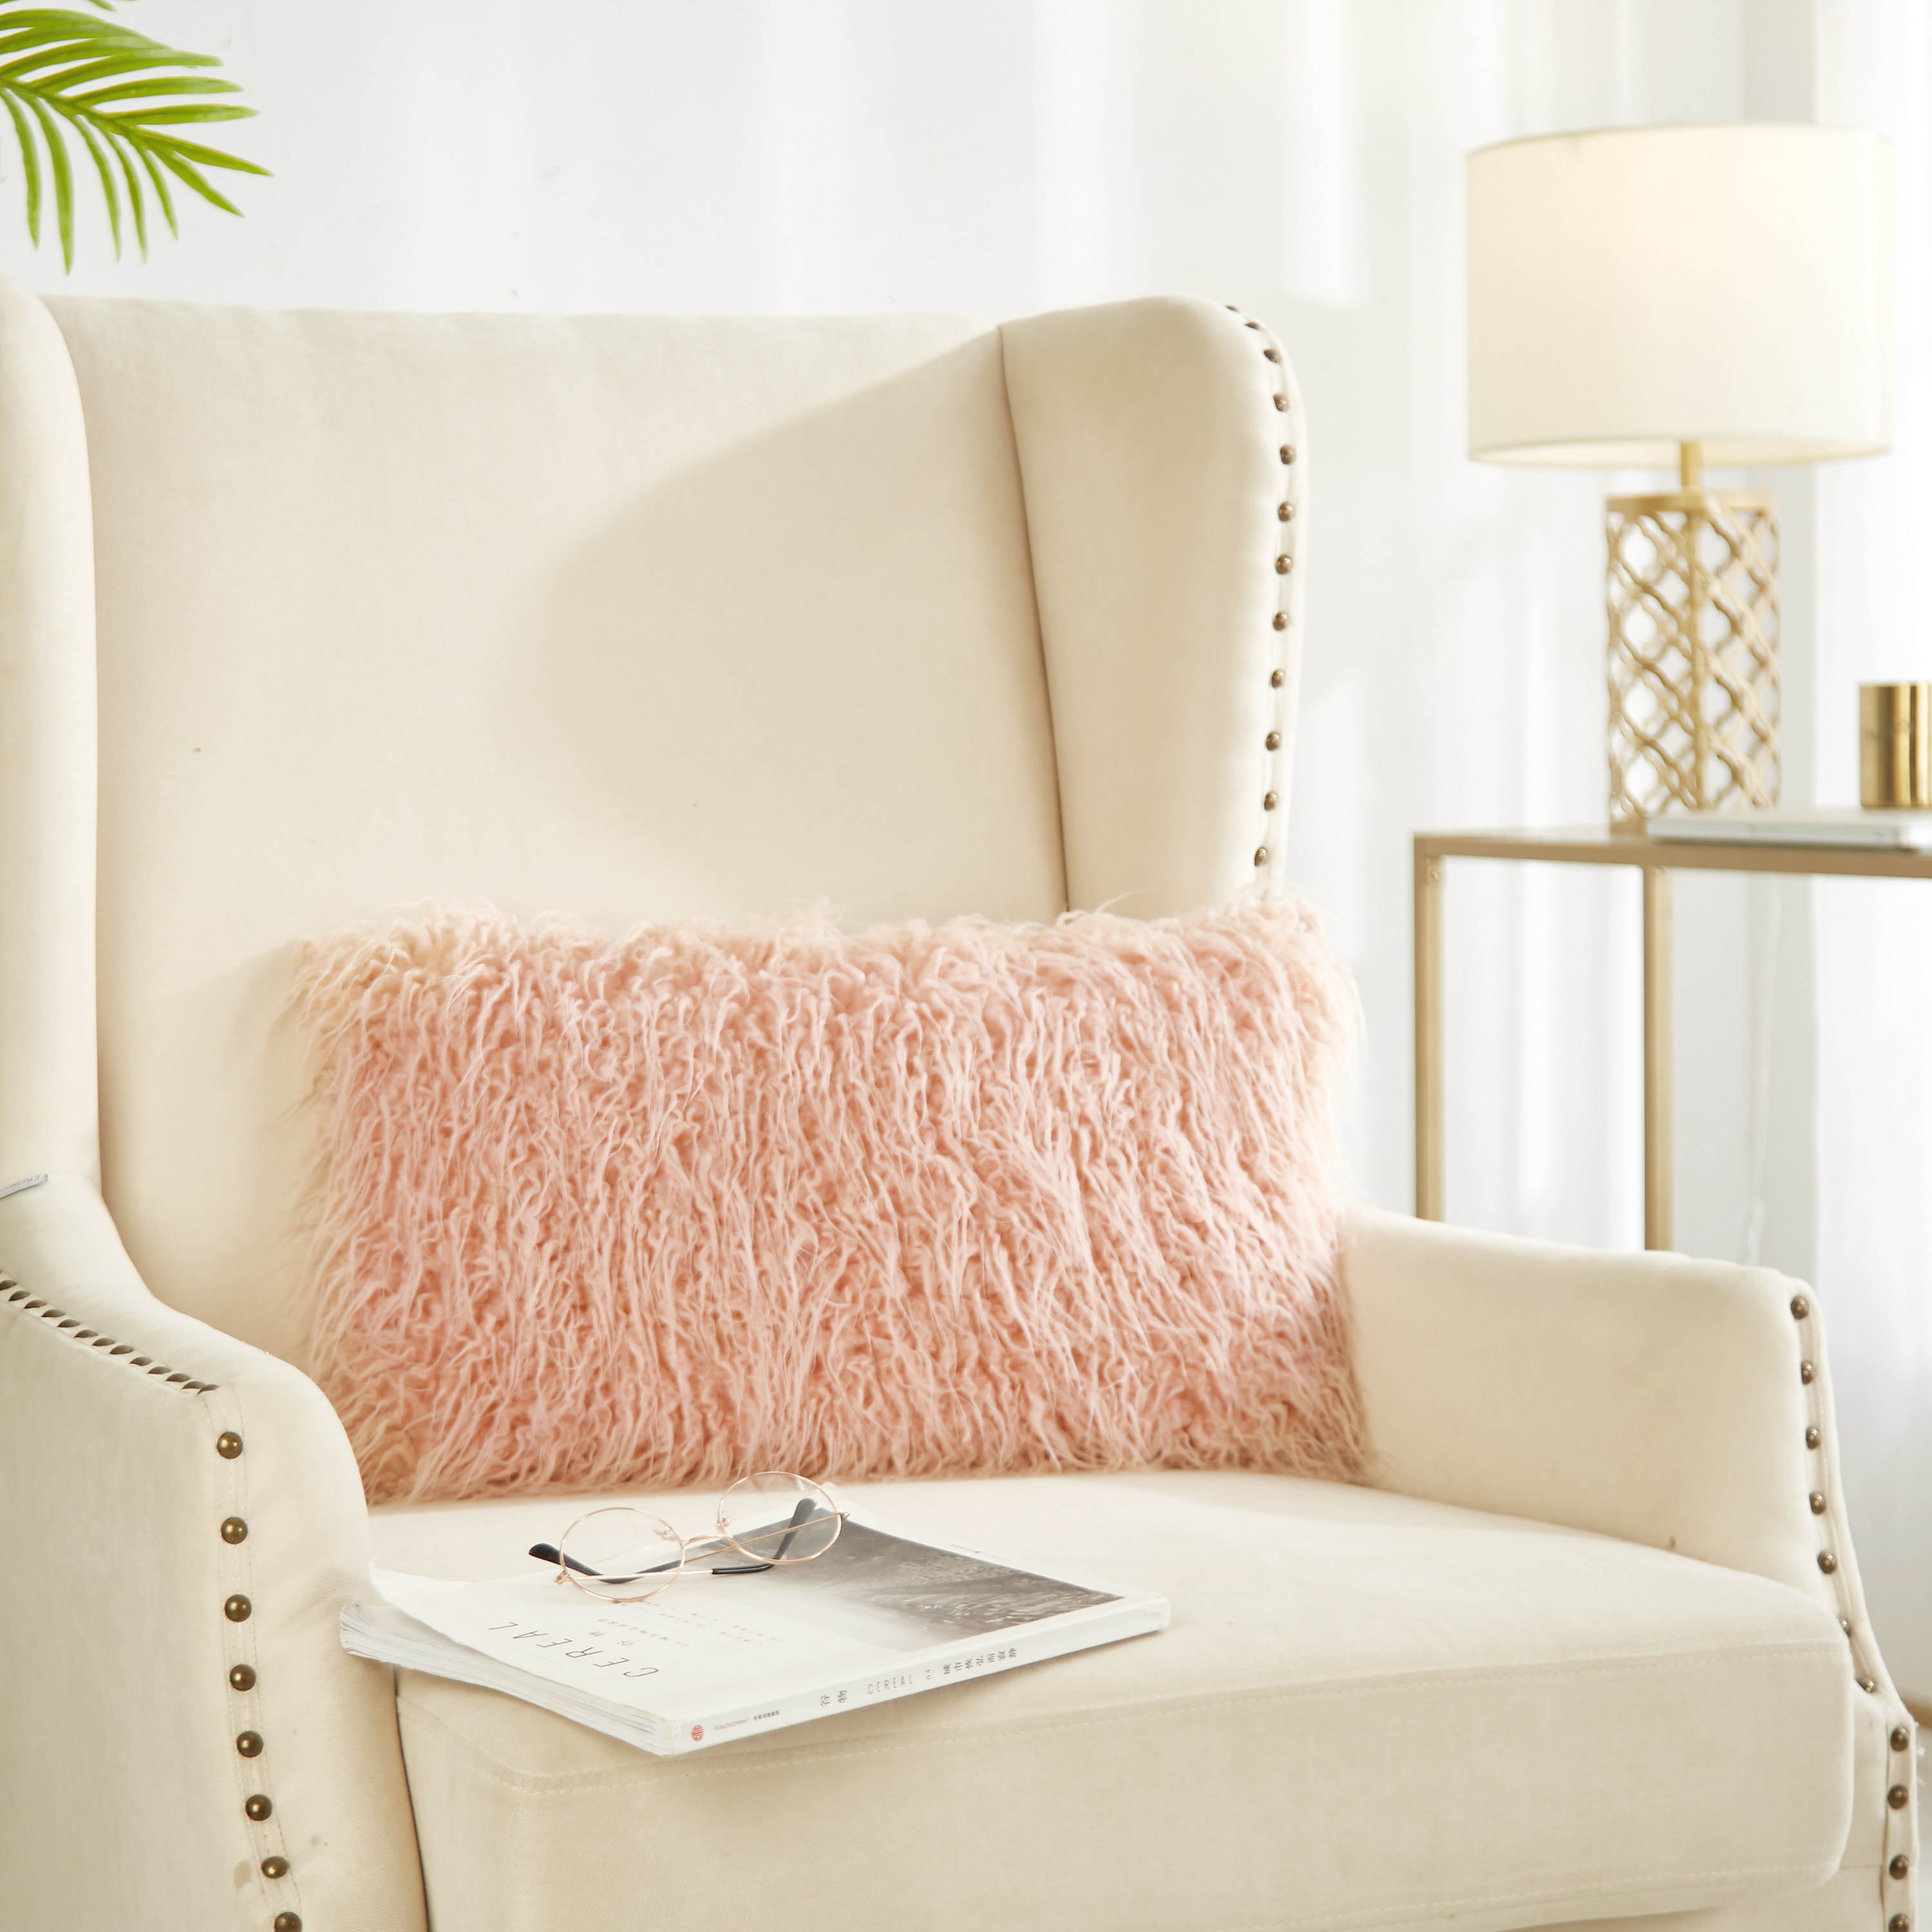 The pillow in pink on upholstered chair